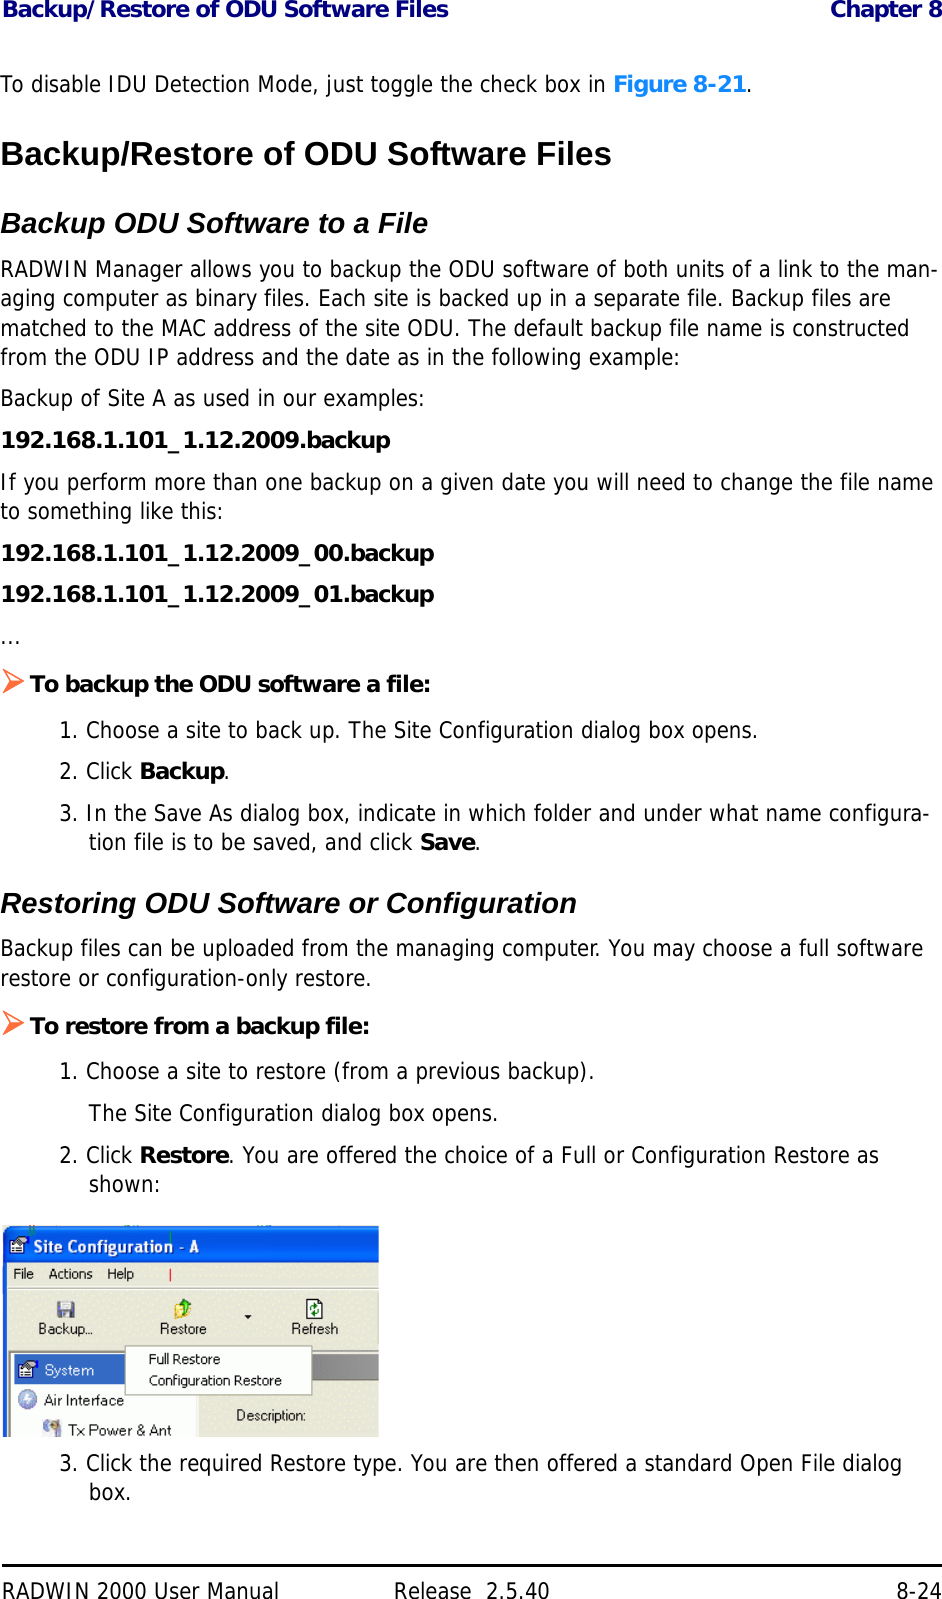 Backup/Restore of ODU Software Files Chapter 8RADWIN 2000 User Manual Release  2.5.40 8-24To disable IDU Detection Mode, just toggle the check box in Figure 8-21.Backup/Restore of ODU Software FilesBackup ODU Software to a FileRADWIN Manager allows you to backup the ODU software of both units of a link to the man-aging computer as binary files. Each site is backed up in a separate file. Backup files are matched to the MAC address of the site ODU. The default backup file name is constructed from the ODU IP address and the date as in the following example:Backup of Site A as used in our examples: 192.168.1.101_1.12.2009.backupIf you perform more than one backup on a given date you will need to change the file name to something like this:192.168.1.101_1.12.2009_00.backup192.168.1.101_1.12.2009_01.backup...To backup the ODU software a file:1. Choose a site to back up. The Site Configuration dialog box opens.2. Click Backup.3. In the Save As dialog box, indicate in which folder and under what name configura-tion file is to be saved, and click Save.Restoring ODU Software or ConfigurationBackup files can be uploaded from the managing computer. You may choose a full software restore or configuration-only restore.To restore from a backup file:1. Choose a site to restore (from a previous backup).The Site Configuration dialog box opens.2. Click Restore. You are offered the choice of a Full or Configuration Restore as shown:3. Click the required Restore type. You are then offered a standard Open File dialog box.